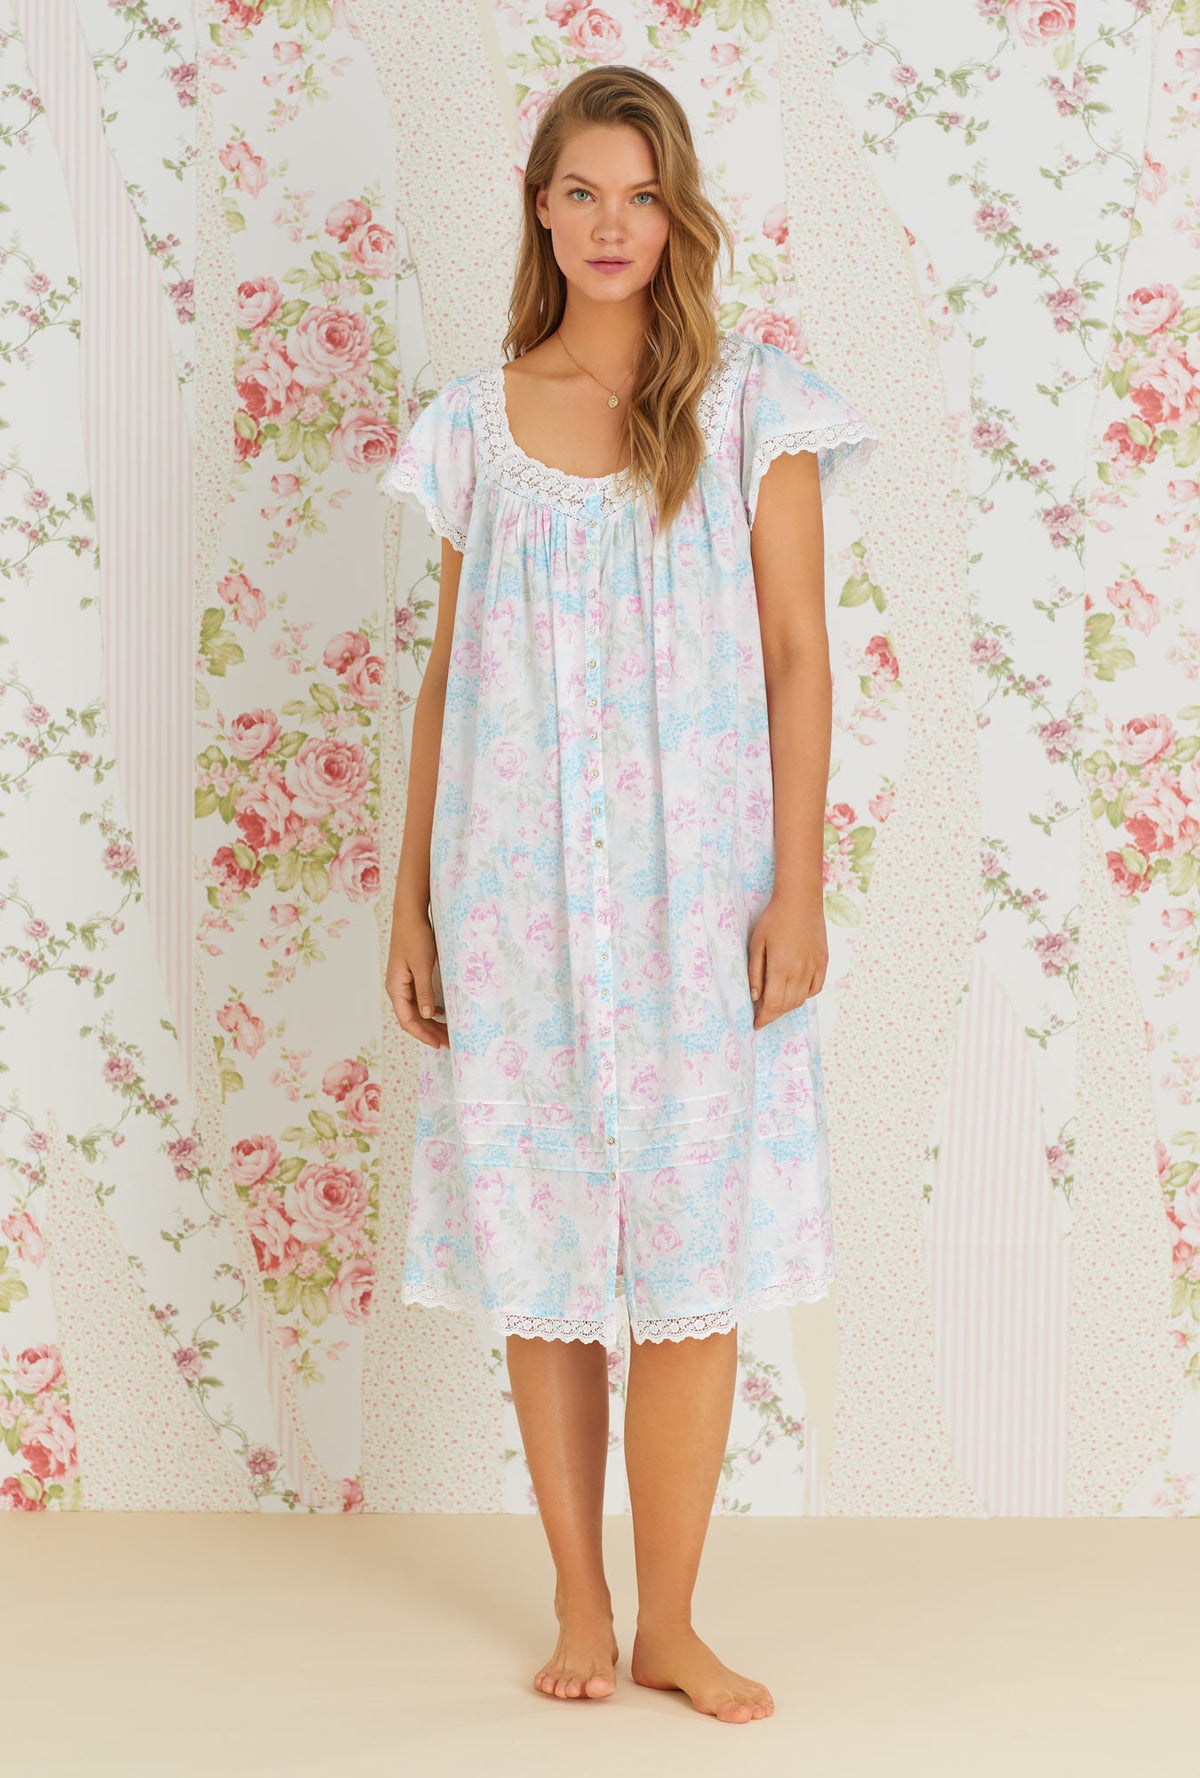 A lady wearing multi color cap sleeve esme waltz nightgown with monterey bay print.